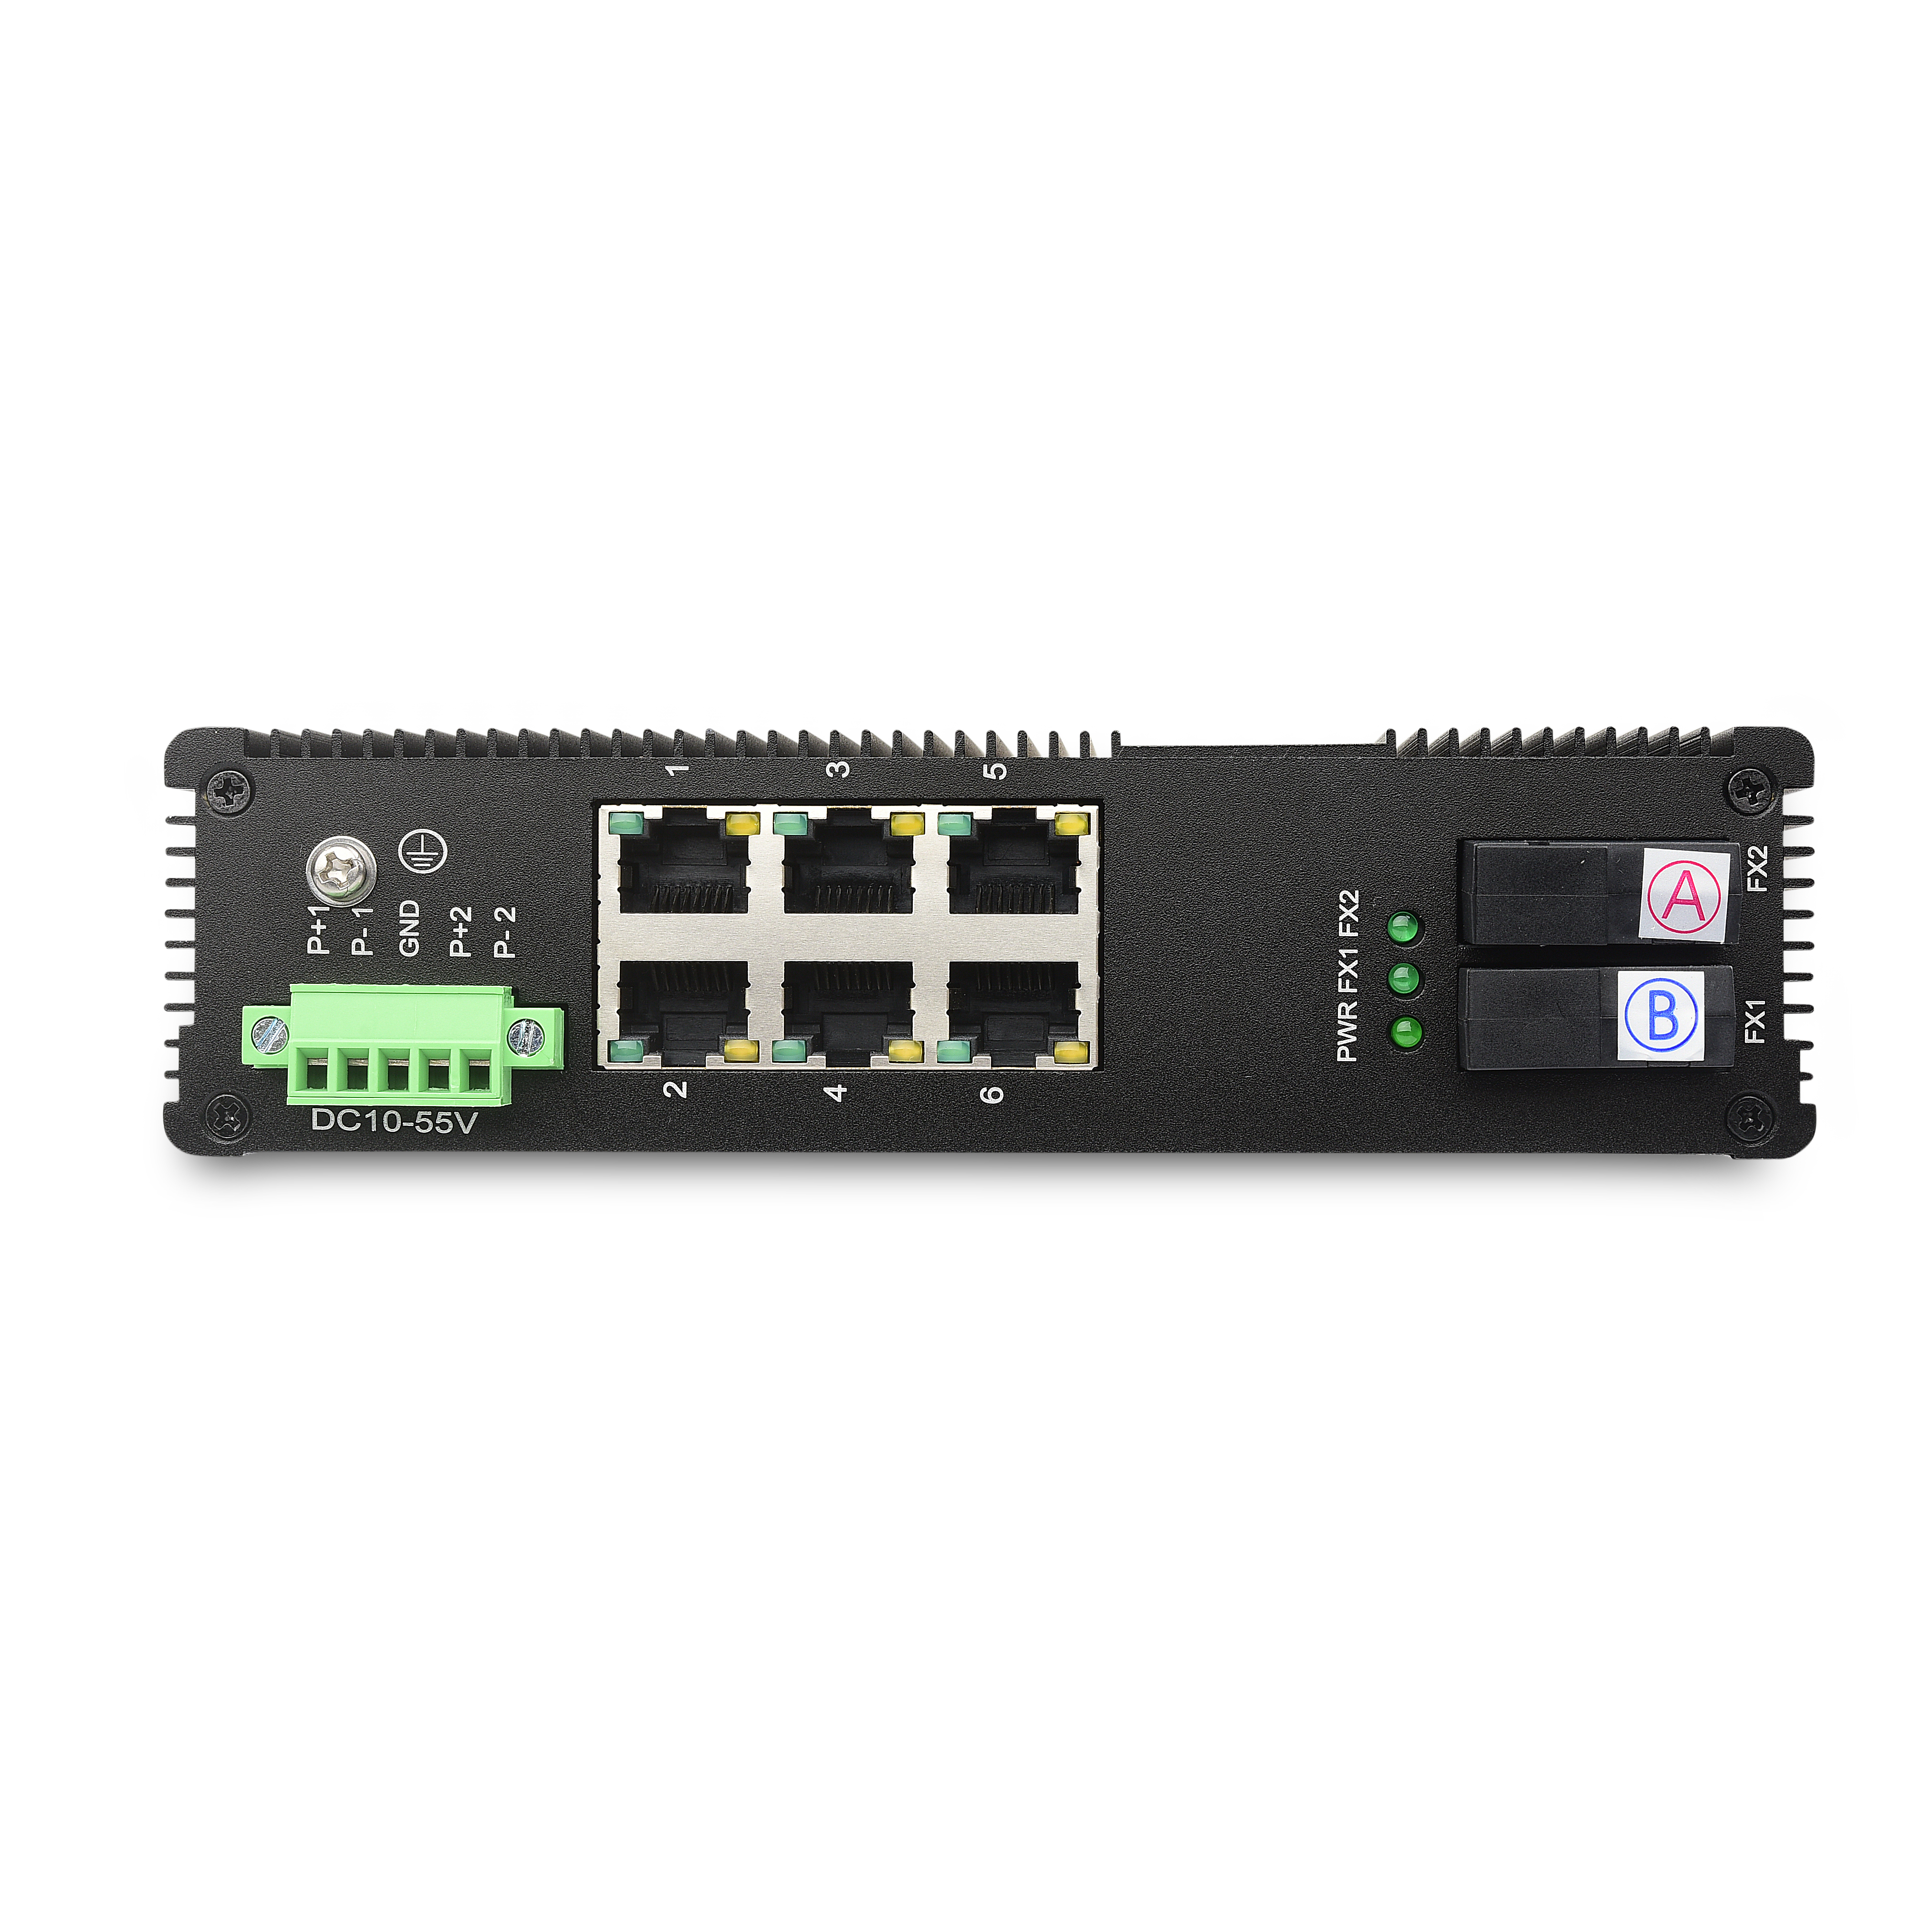 China 6 10/100TX PoE/PoE+ and 2 100FX, Unmanaged Industrial PoE Switch  JHA-IF26HP factory and suppliers